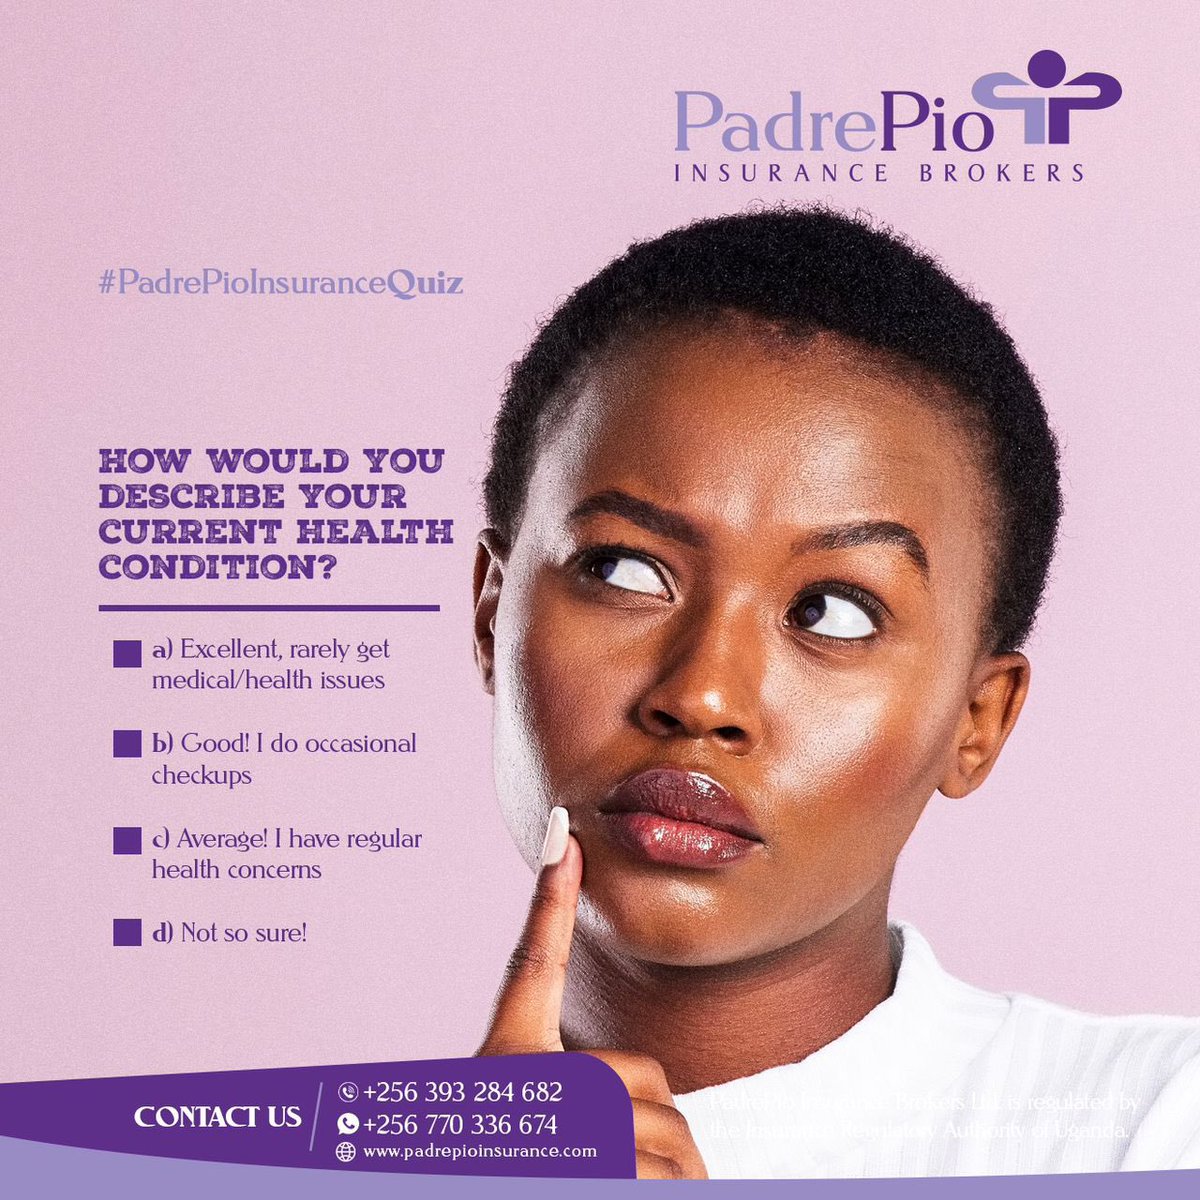 #PadrePioInsuranceQuiz
How would you describe your current health condition?

a) Excellent, rarely get medical/health issues
b) Good! I do occasional checkups
c) Average! I have regular health concerns
d) Not so sure!

#InsuranceWeek2024